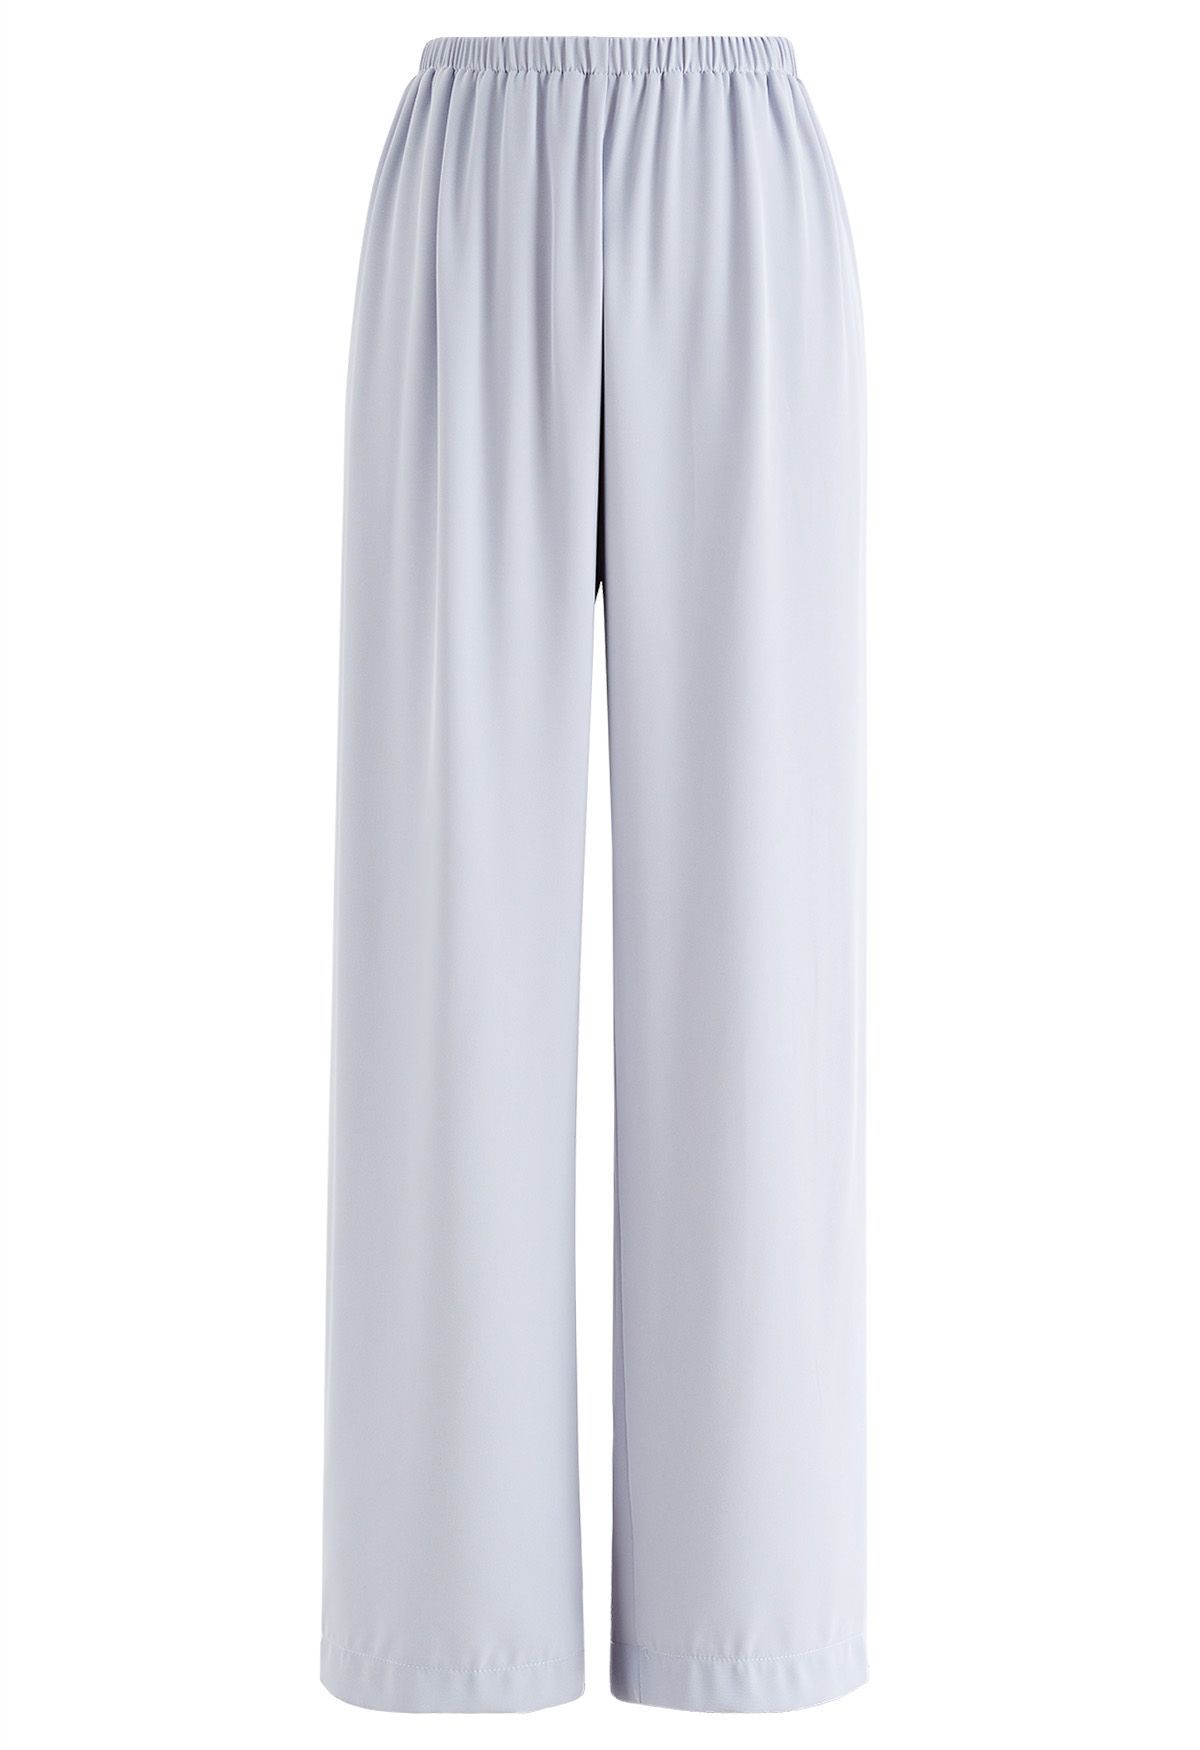 Smooth Satin Pull-On Pants in Lavender | Chicwish